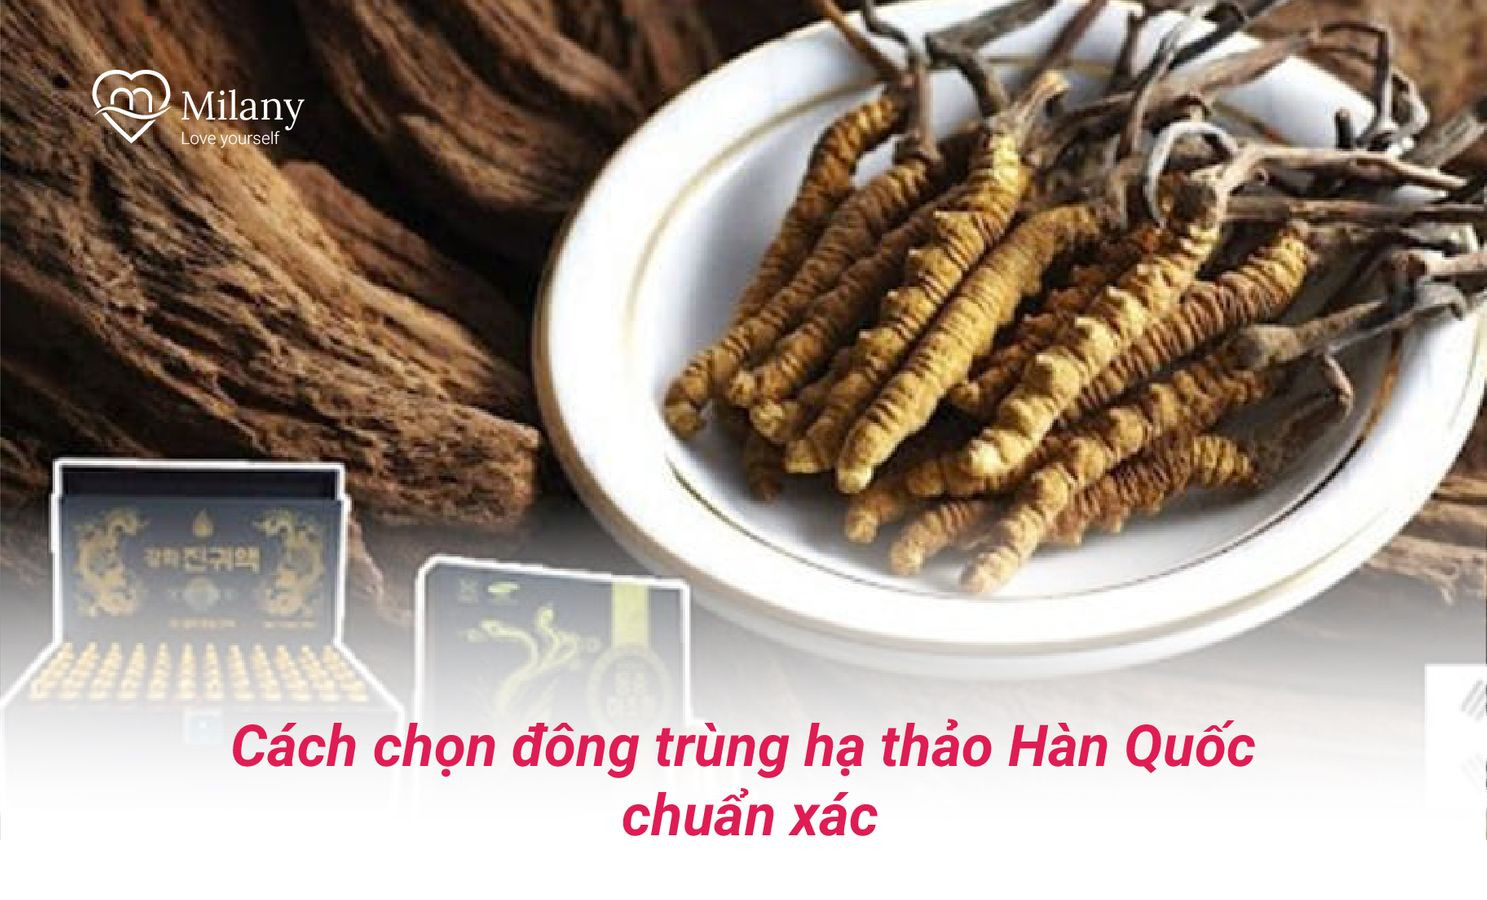 cach chon dong trung ha thao han quoc